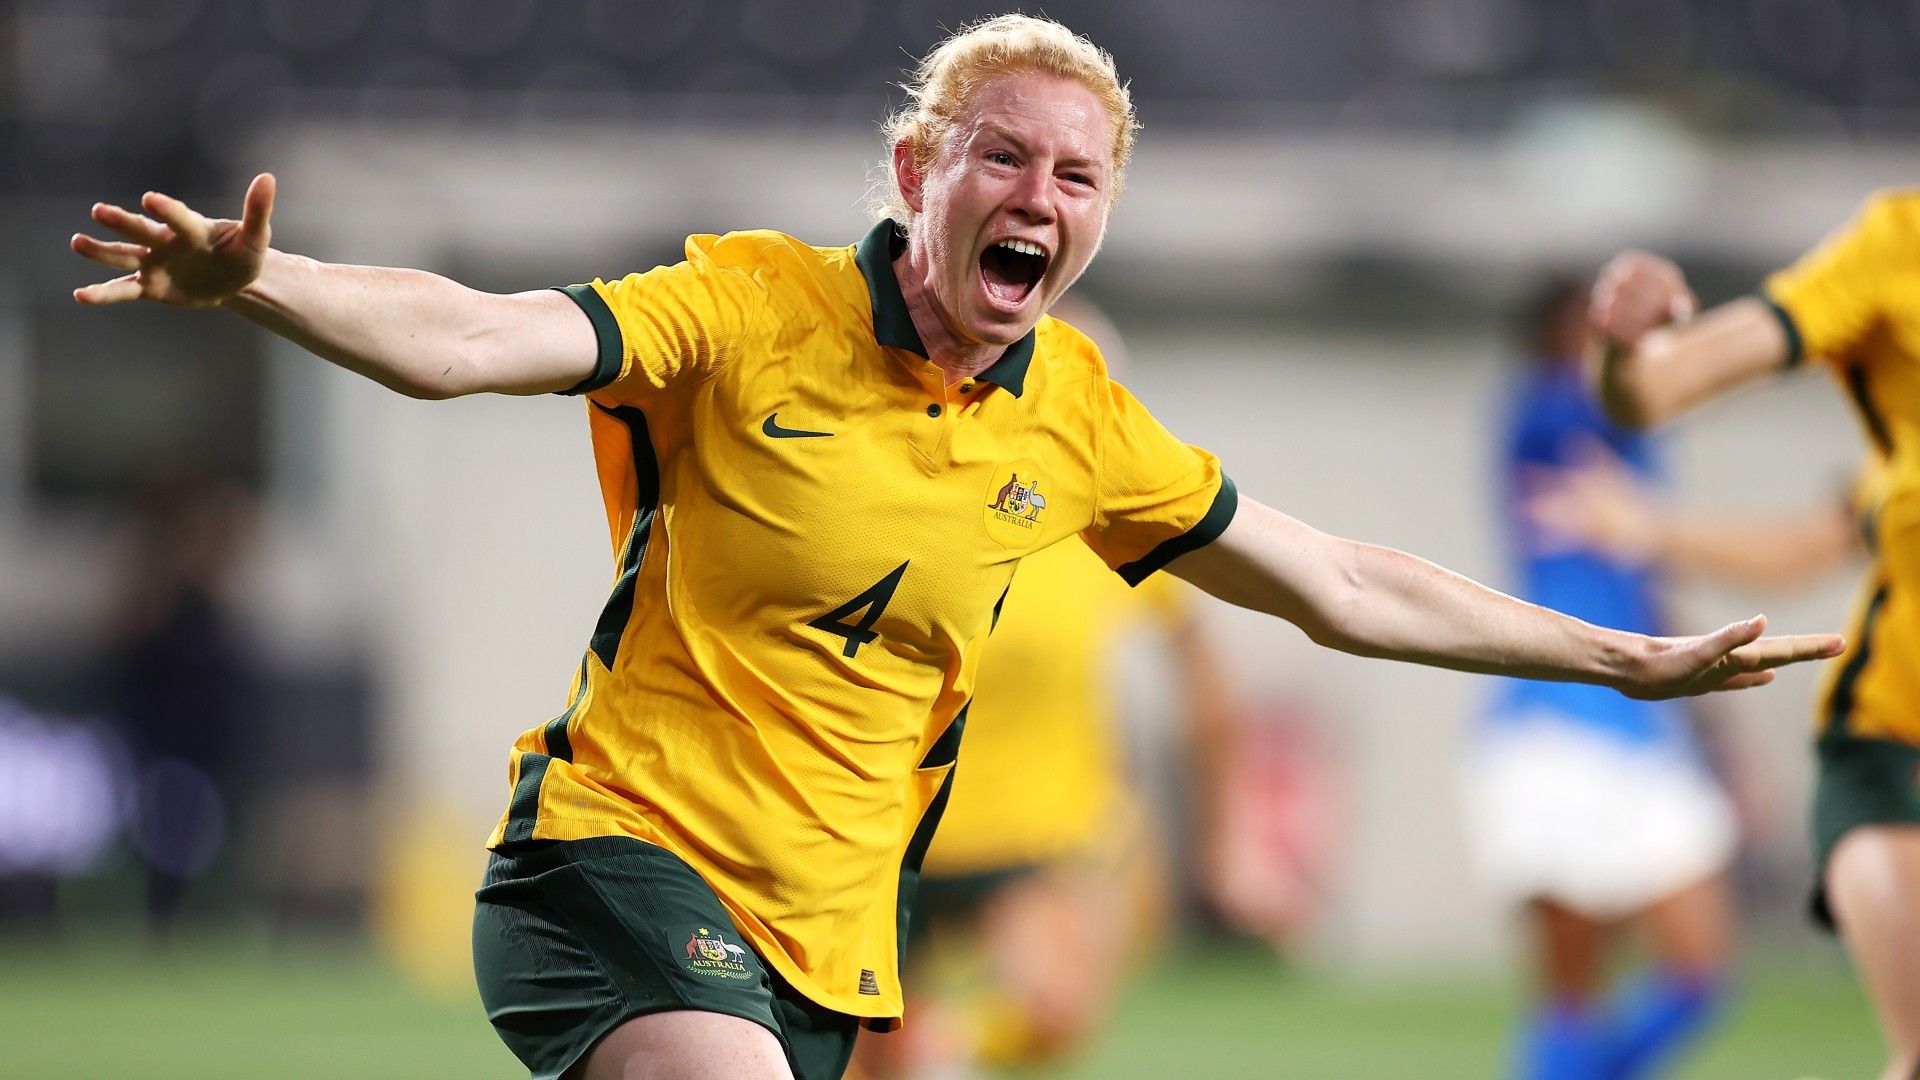 After nearly two years away, Matildas finally return home in big win over Brazil